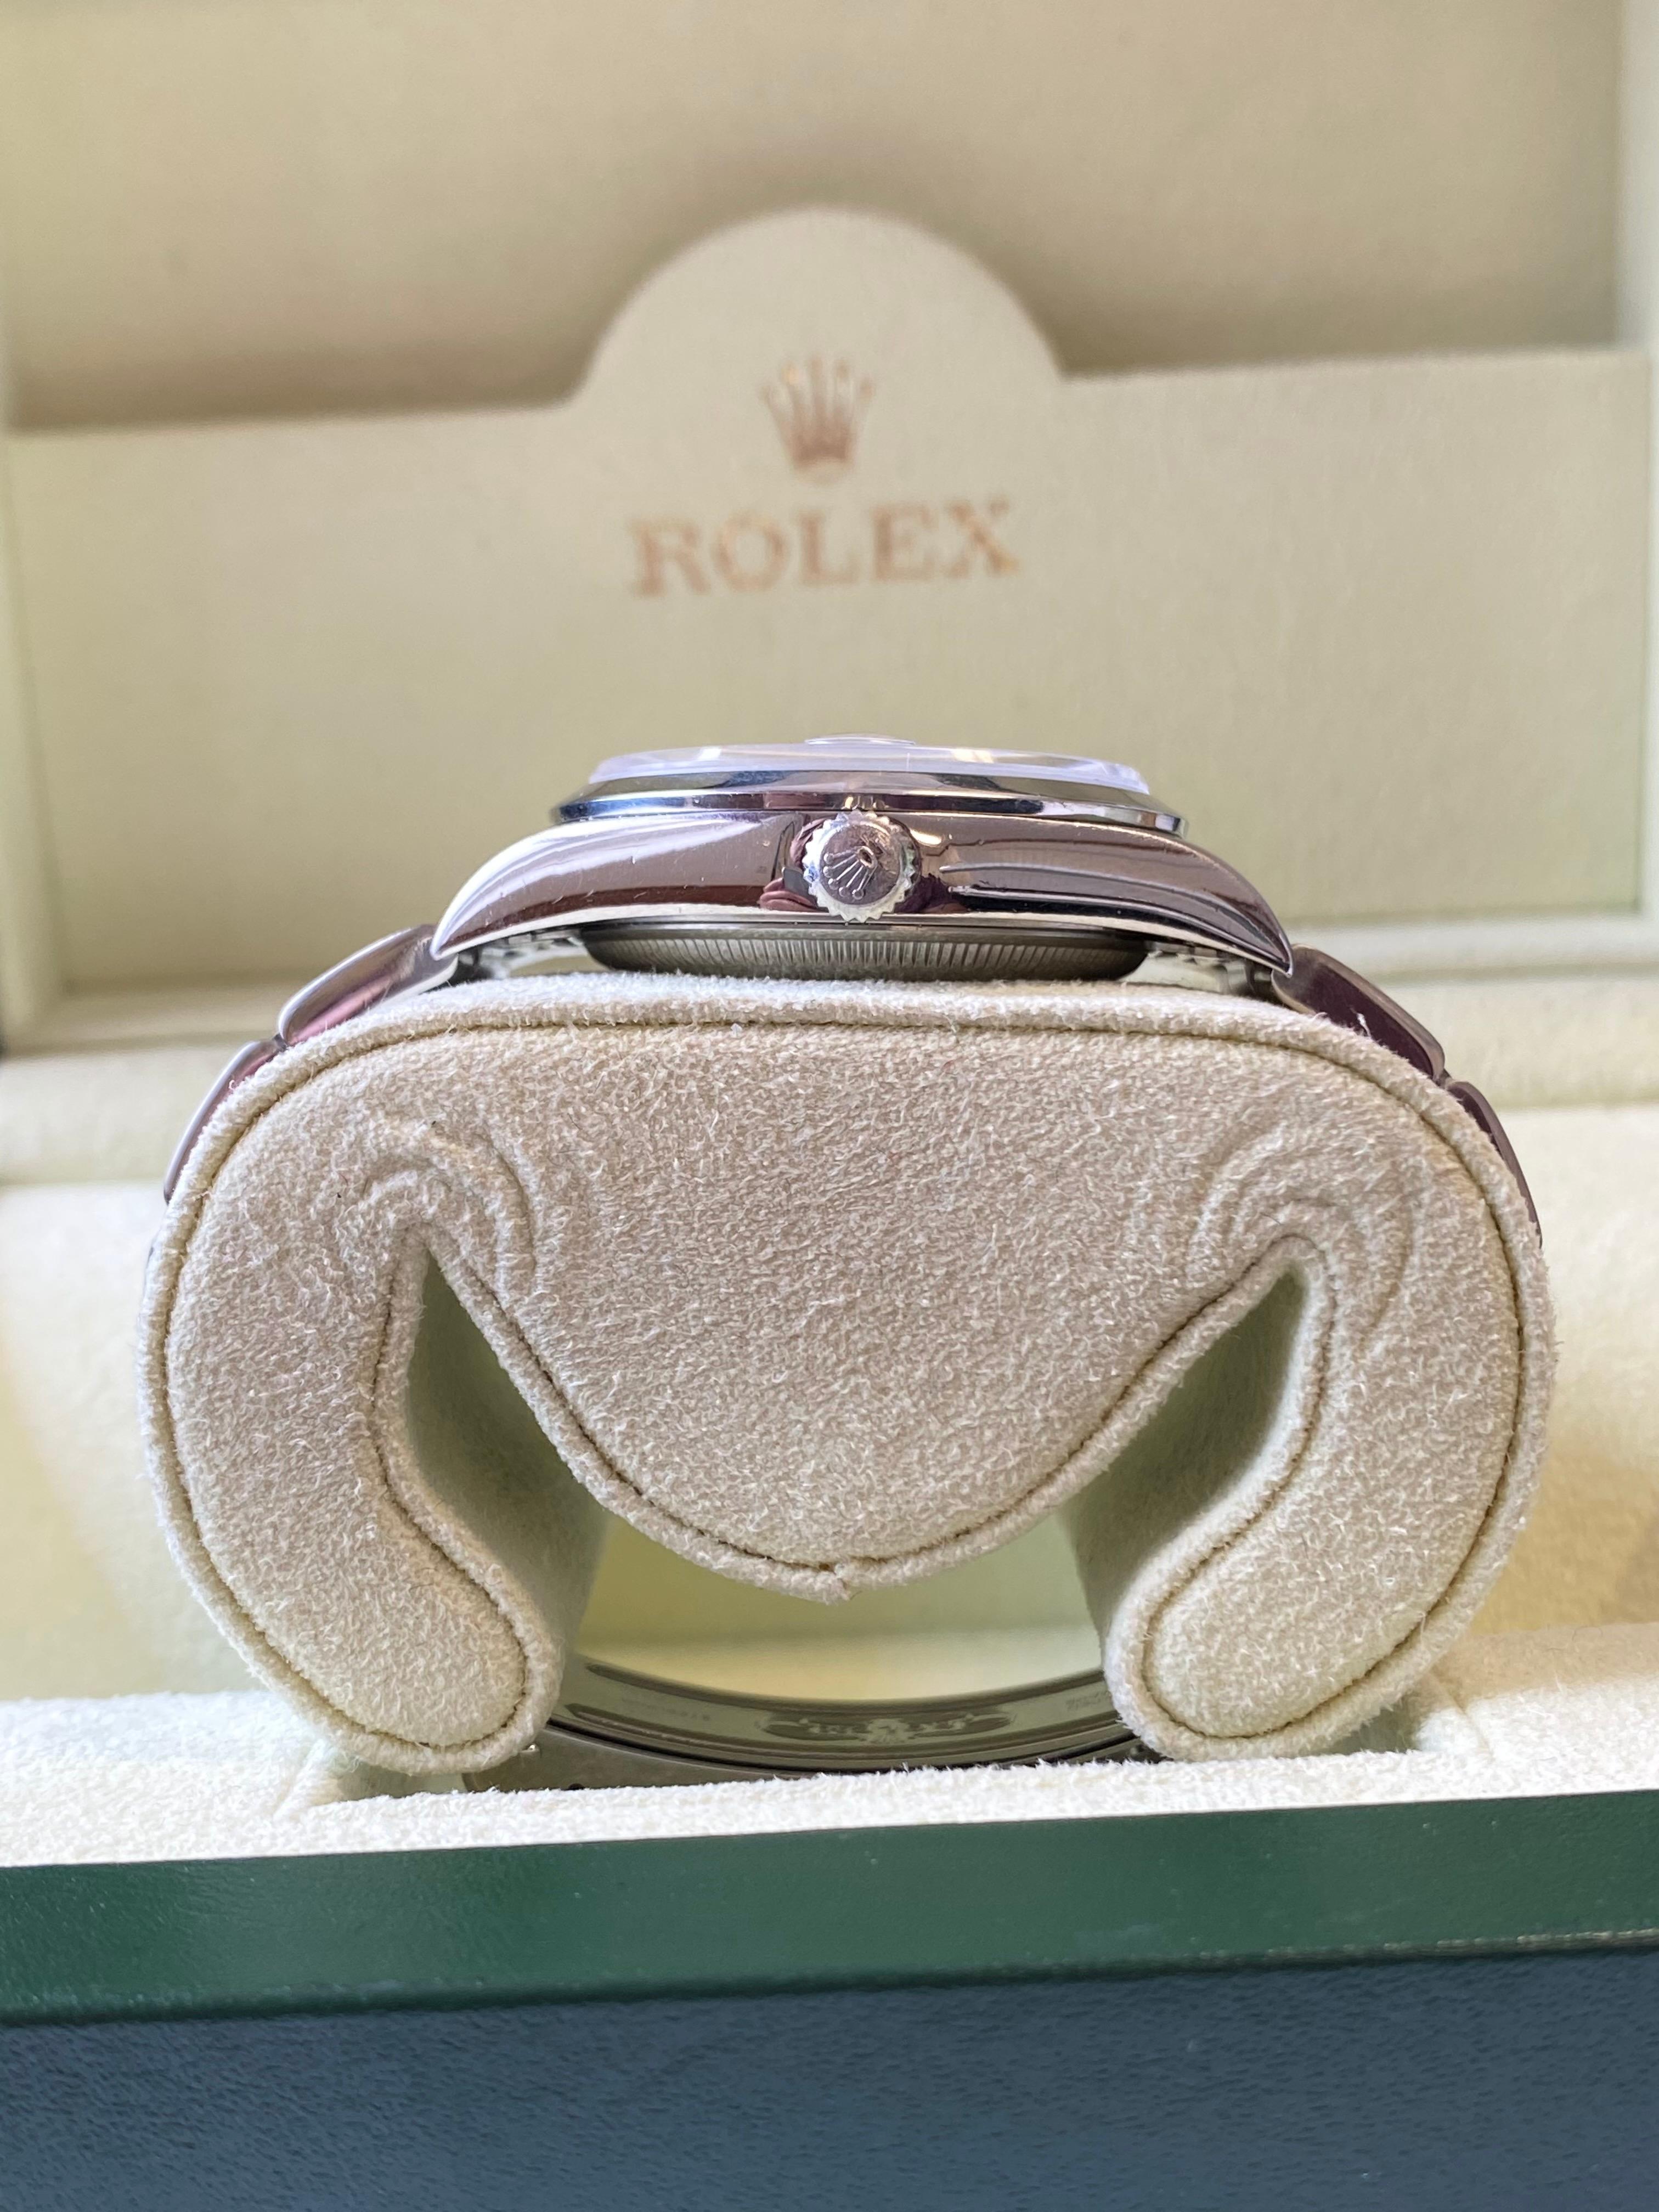 Rolex Perpetual Date with White Dial and Oyster Band In Excellent Condition For Sale In Miami, FL